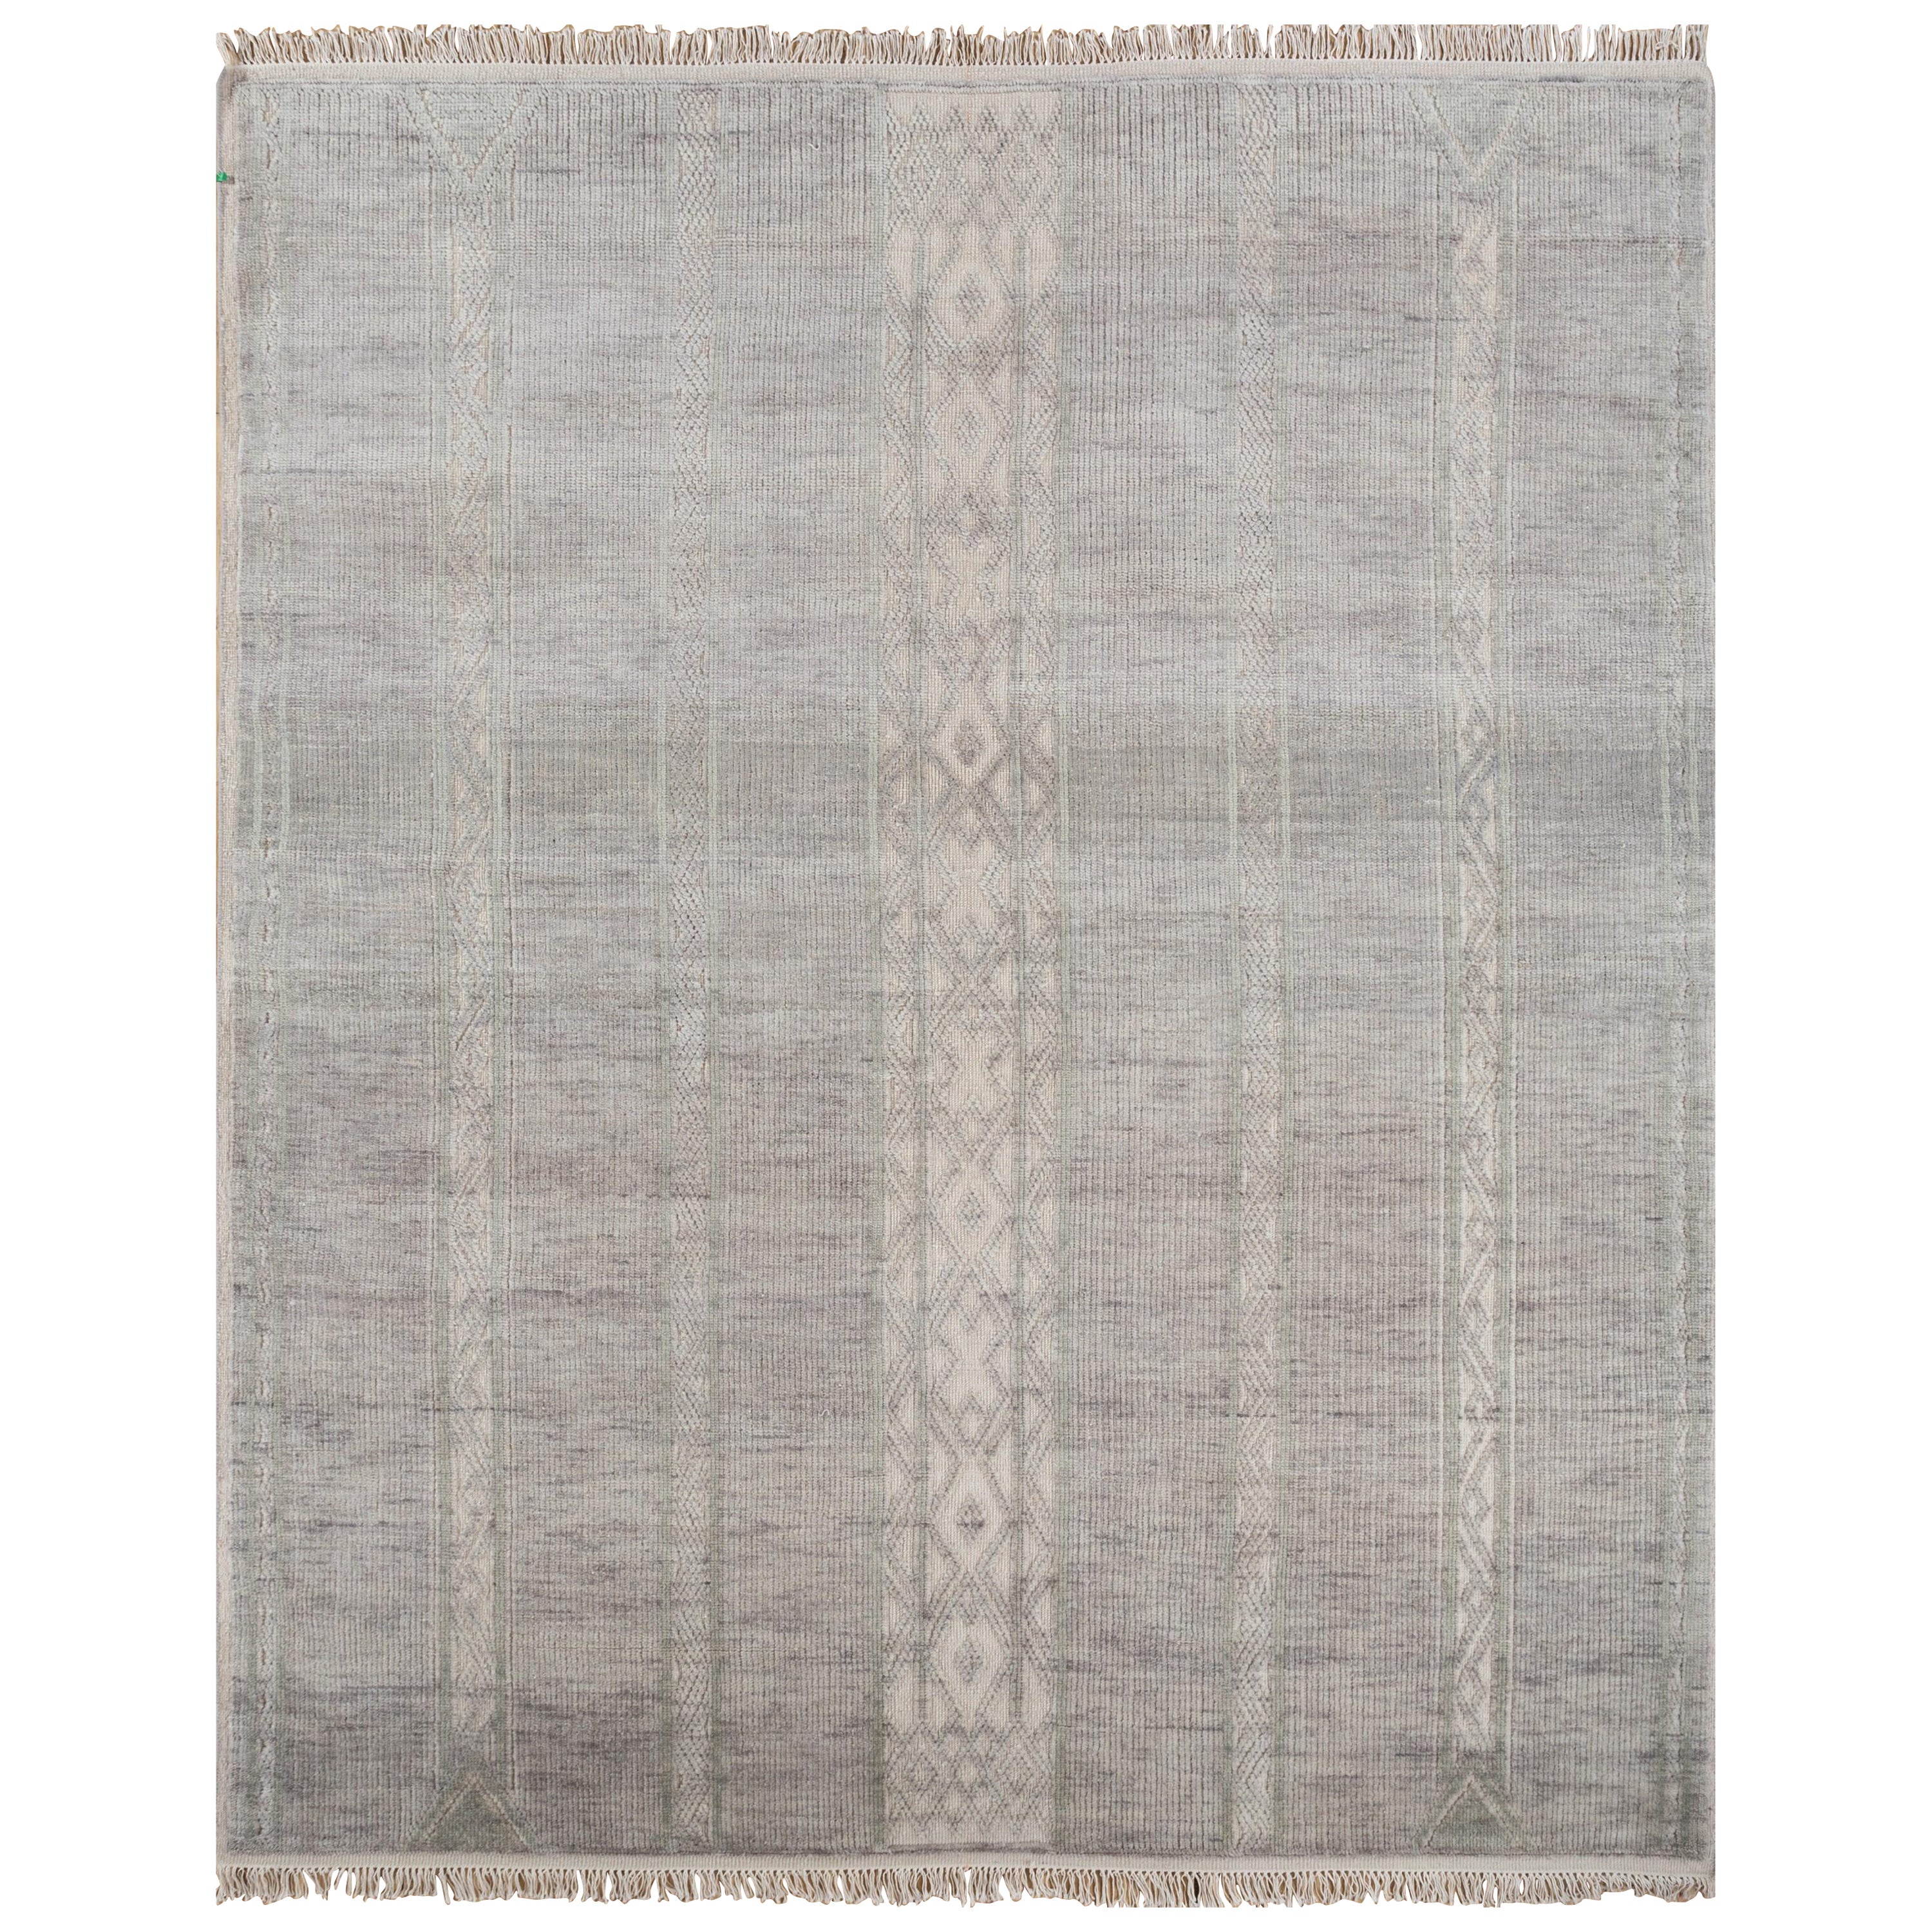 Rural Bliss Mosaic Nickel & White 240X300 cm Handknotted Rug For Sale